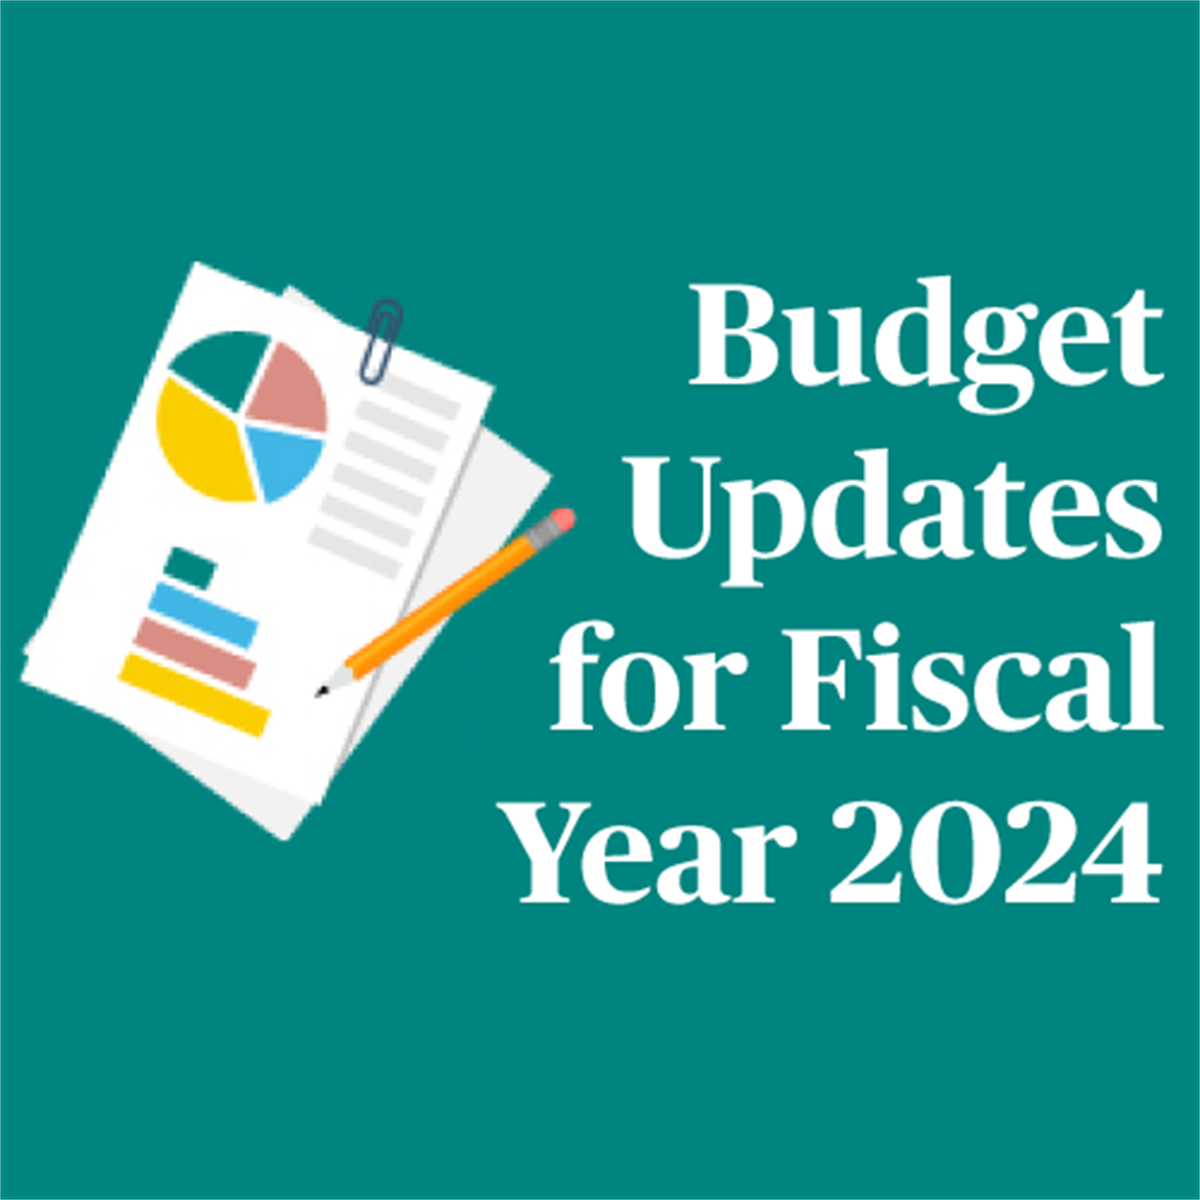 Budget Information for FY 2024 to the City of Gainesville